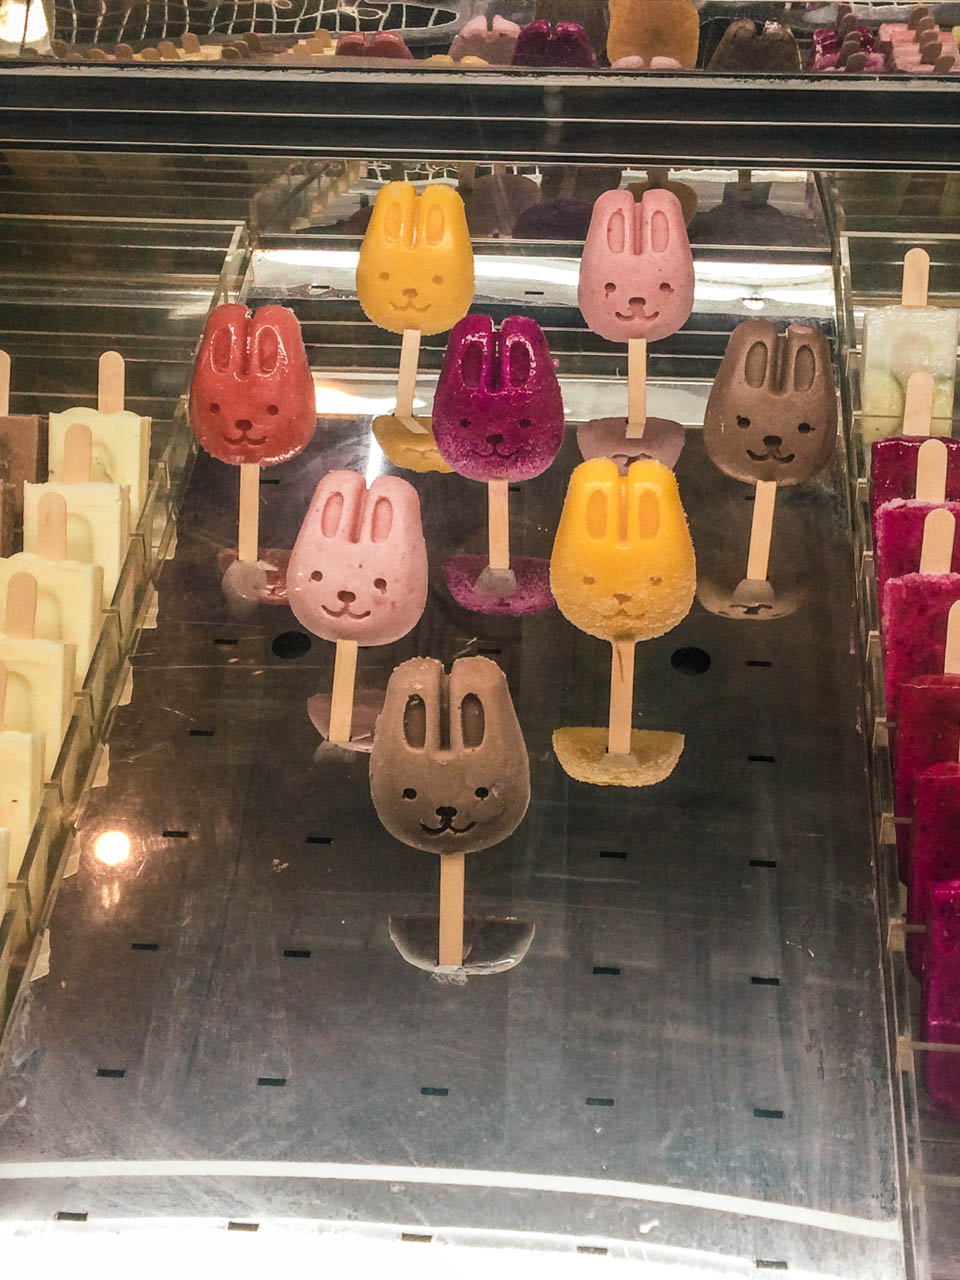 Different types of colourful bunny-shaped ice cream in a glass display case at a shop in Beijing